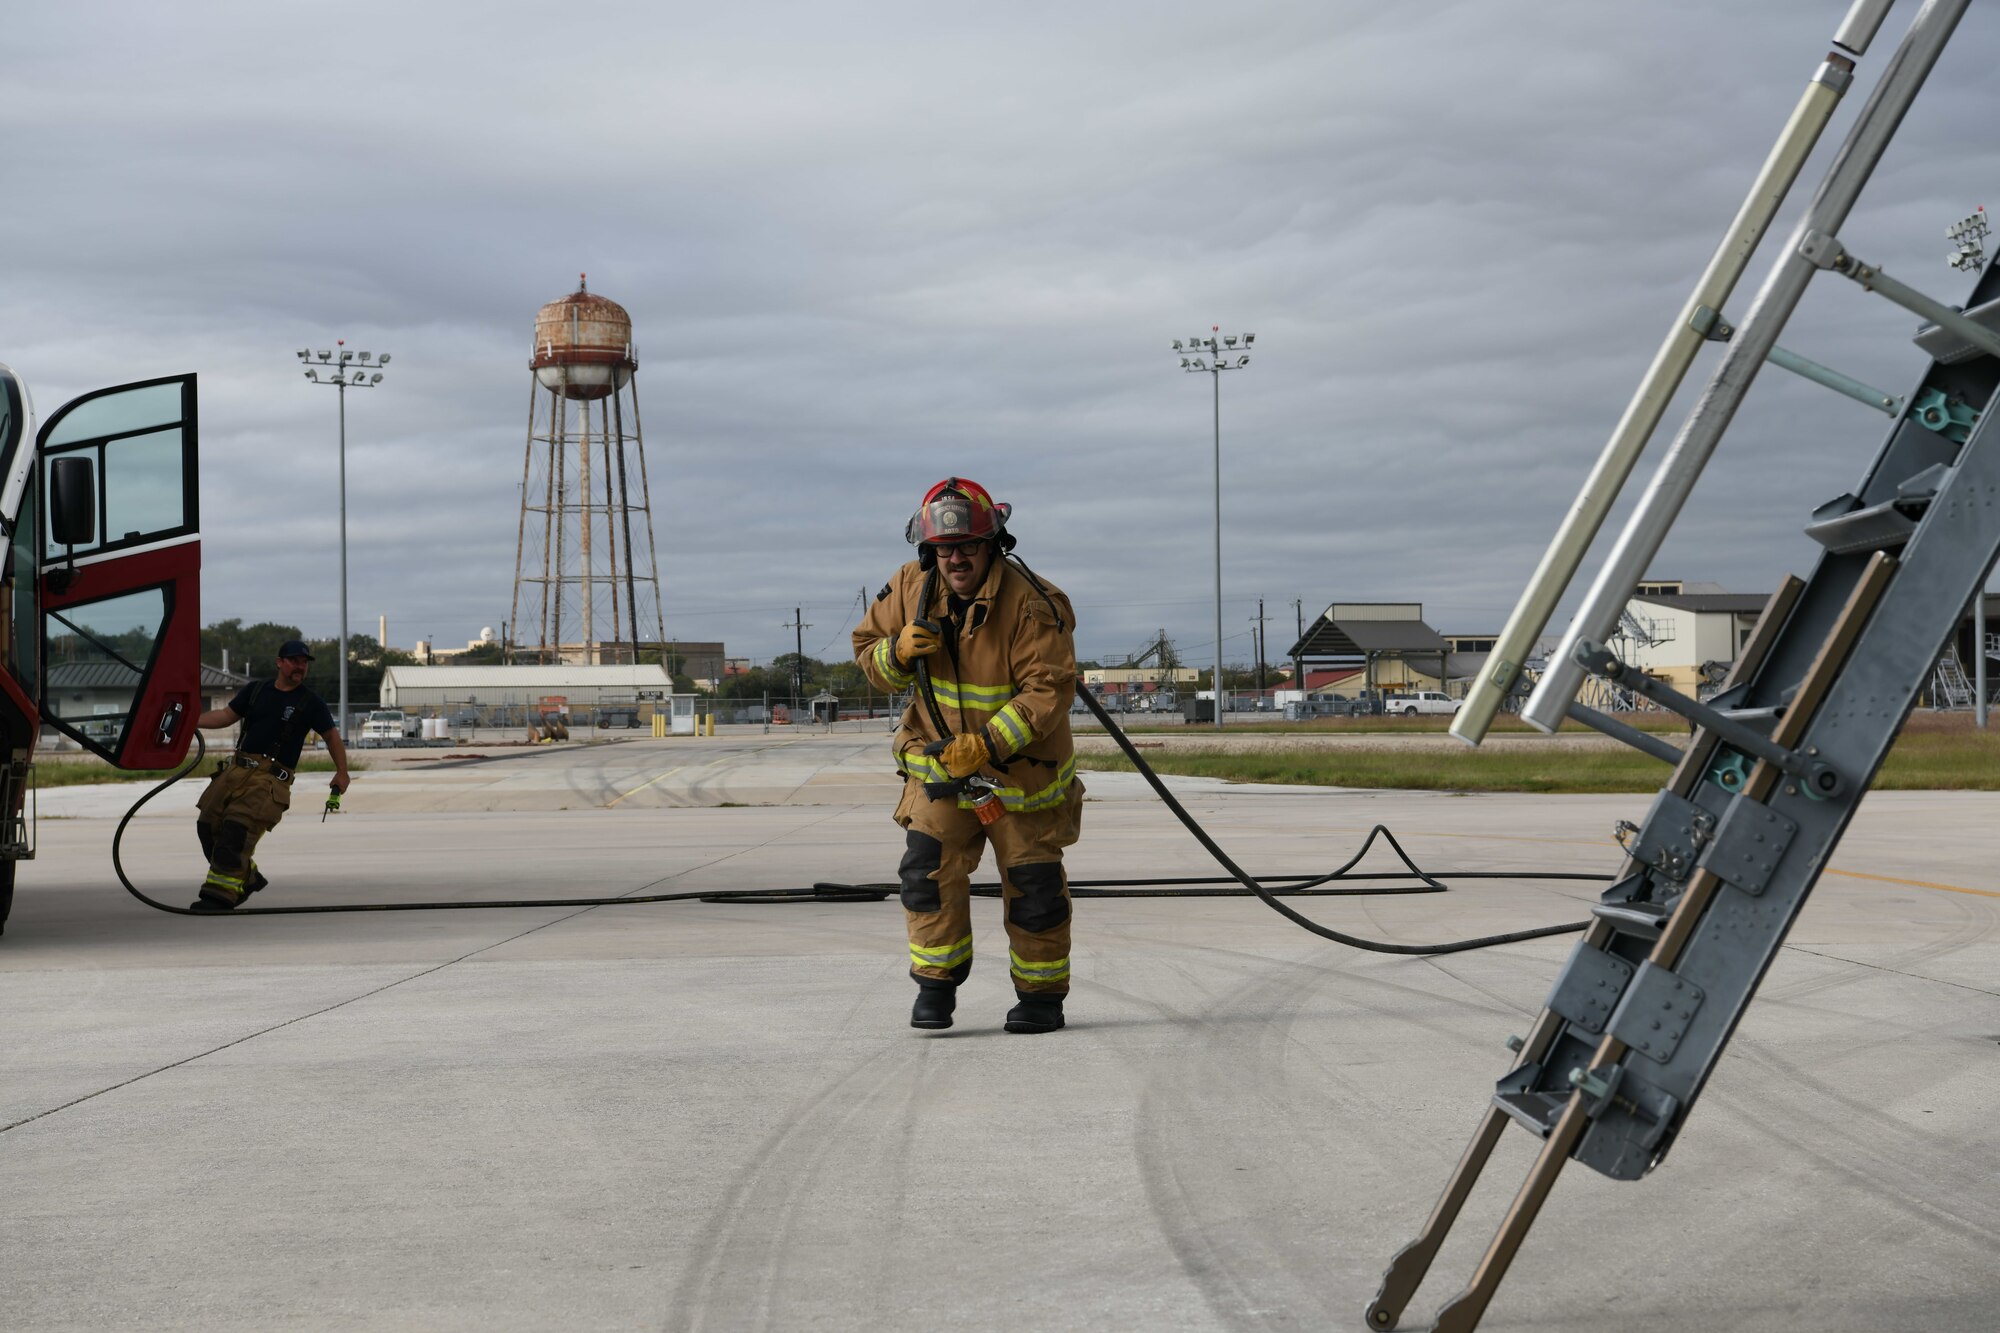 Rosendo Soto, 902nd Civil Engineer Squadron lead firefighter, pulls a water hose as he prepares to enter a 433rd Airlift Wing C-5M Super Galaxy during an emergency response exercise Nov. 15, 2021, at Joint Base San Antonio-Lackland, Texas. The event was designed to familiarize new firefighters on C-5 procedures and provide refresher training for seasoned team members. (U.S. Air Force photo by Master Sgt. Kristian Carter)